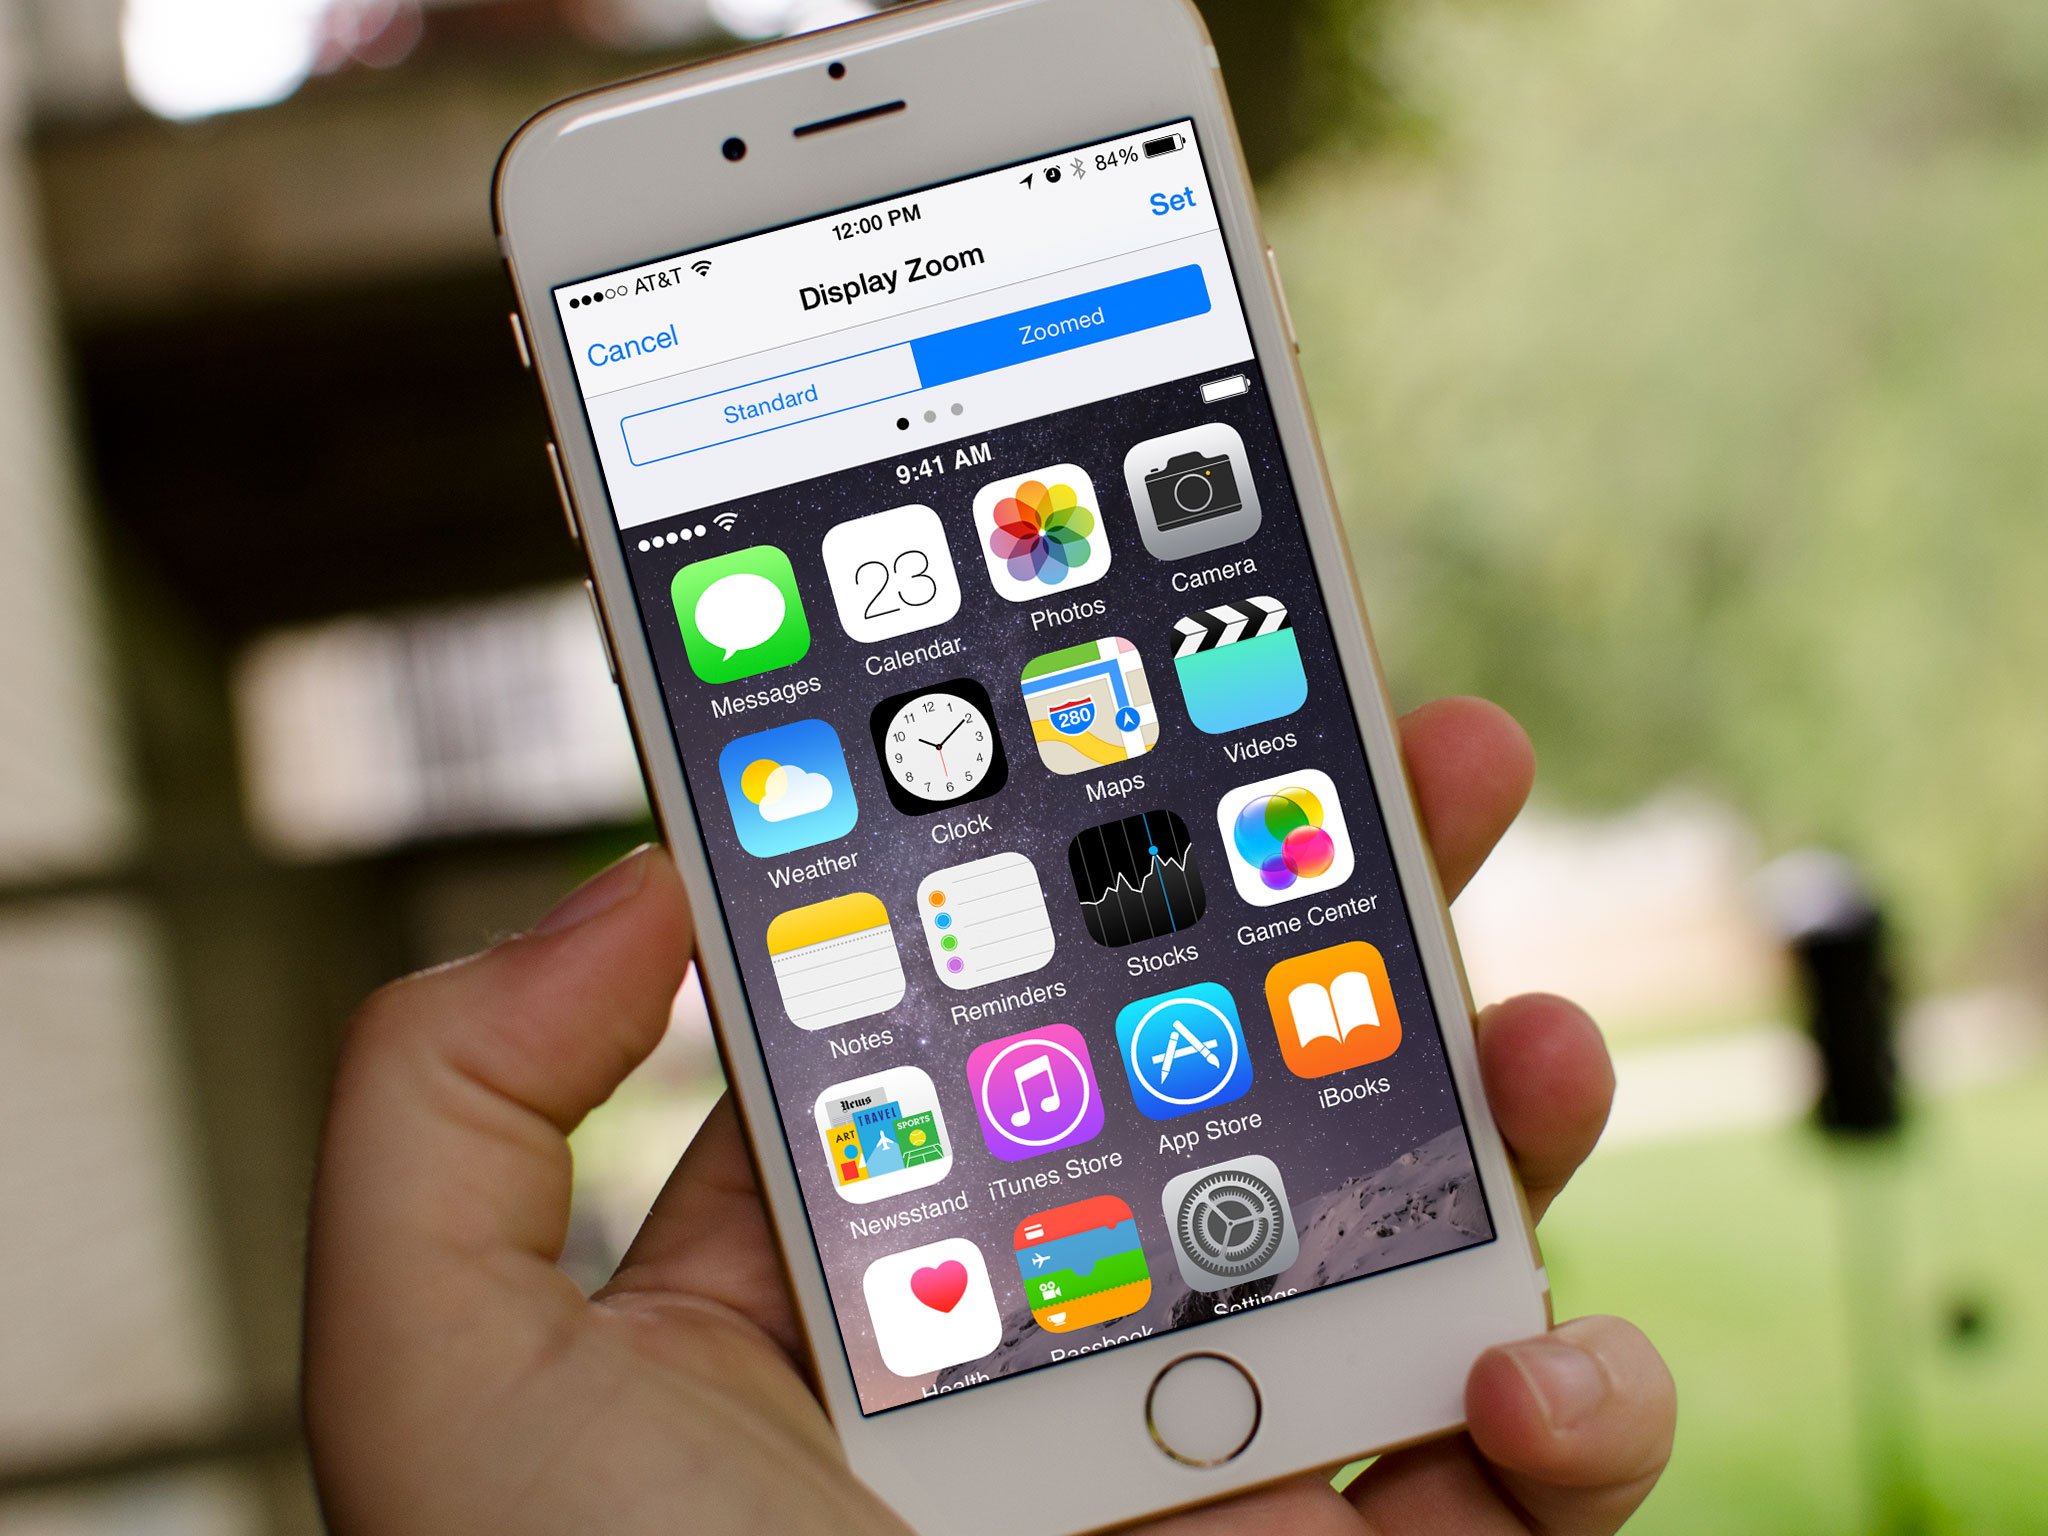 How to make icons, text, and graphics larger with Display Zoom for iPhone 6 and 6 Plus